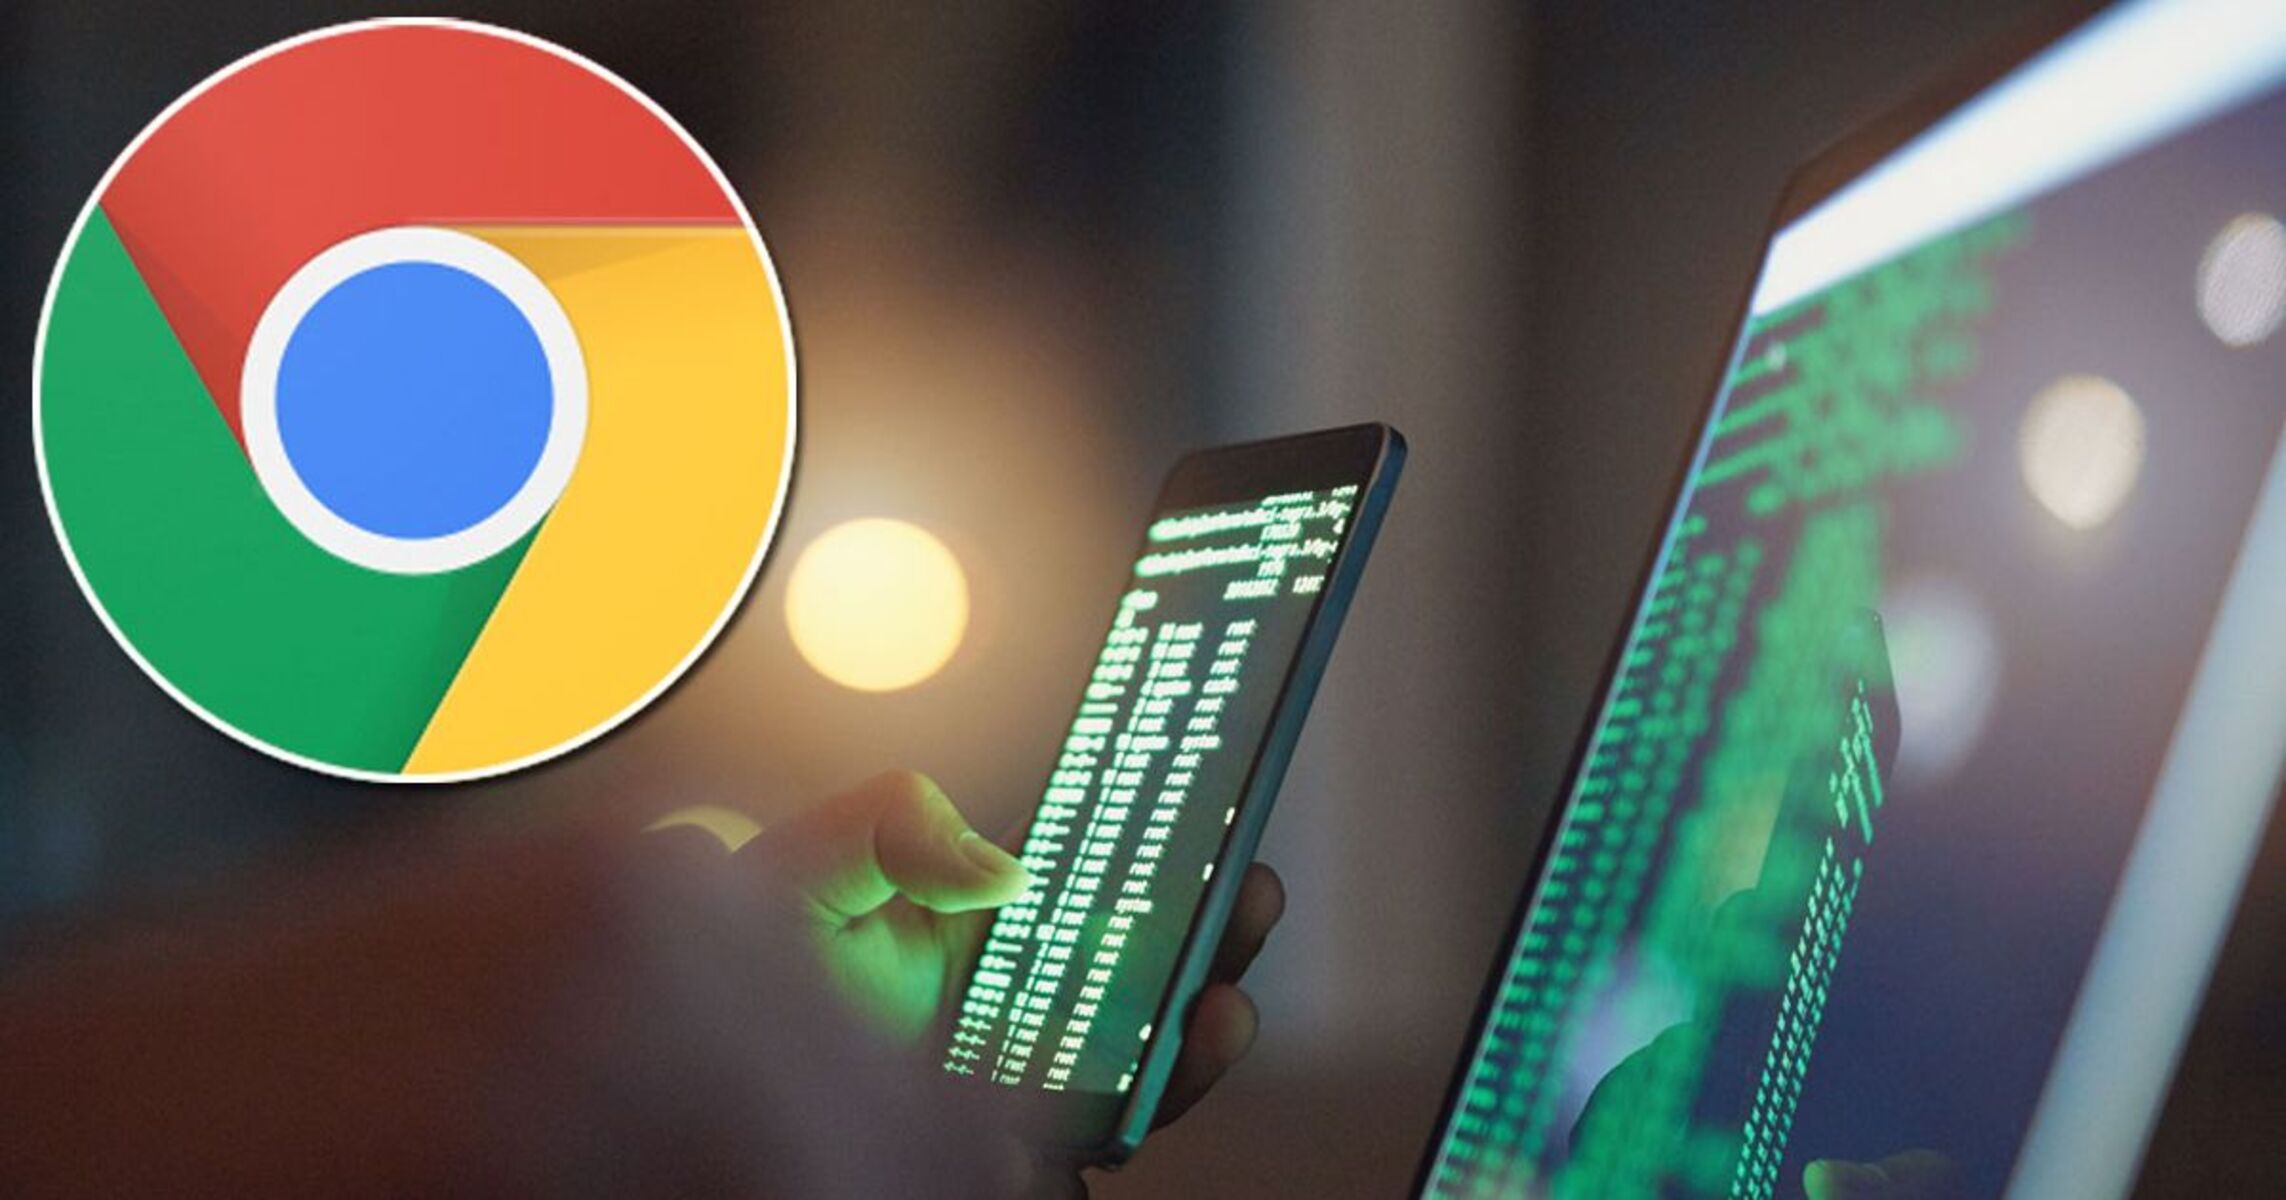 0 MAIN Google Chrome bug discovered that could let hackers access your private data 1